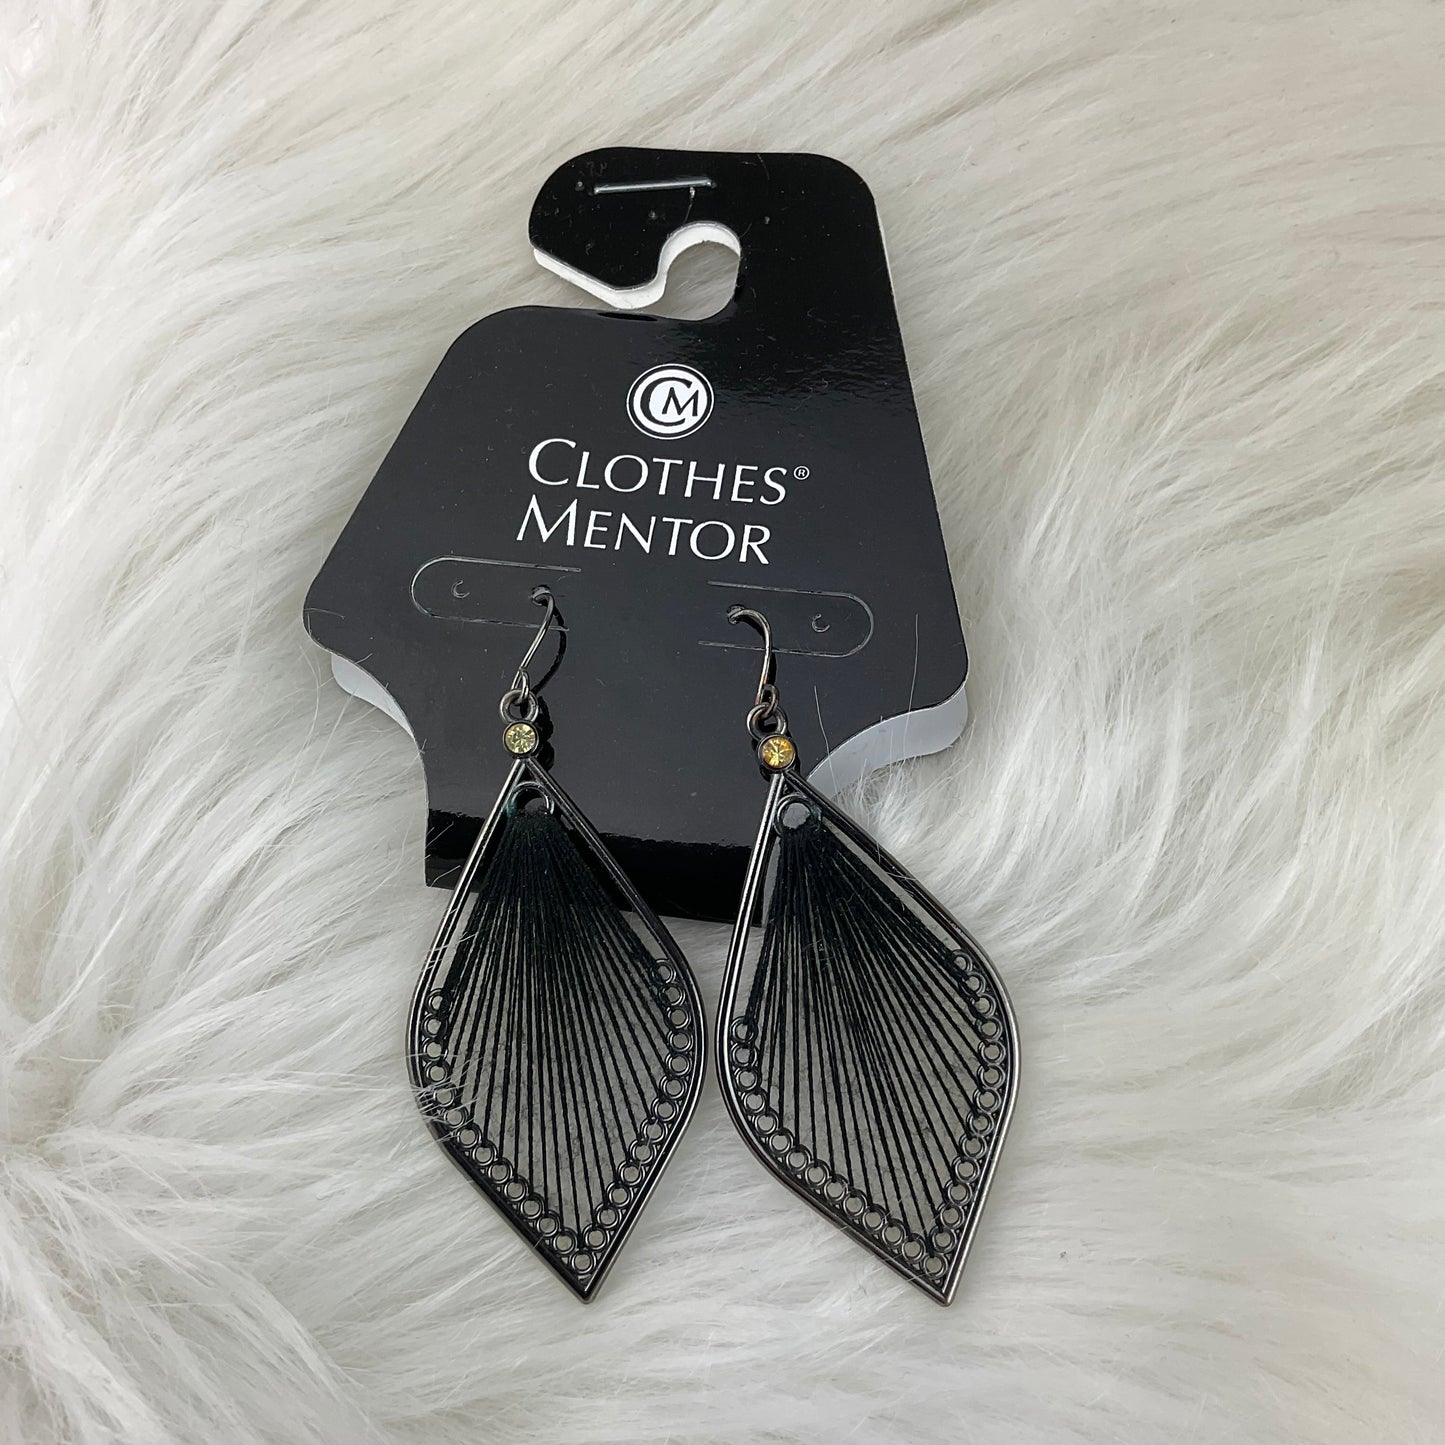 Earrings Dangle/drop Clothes Mentor, Size 0